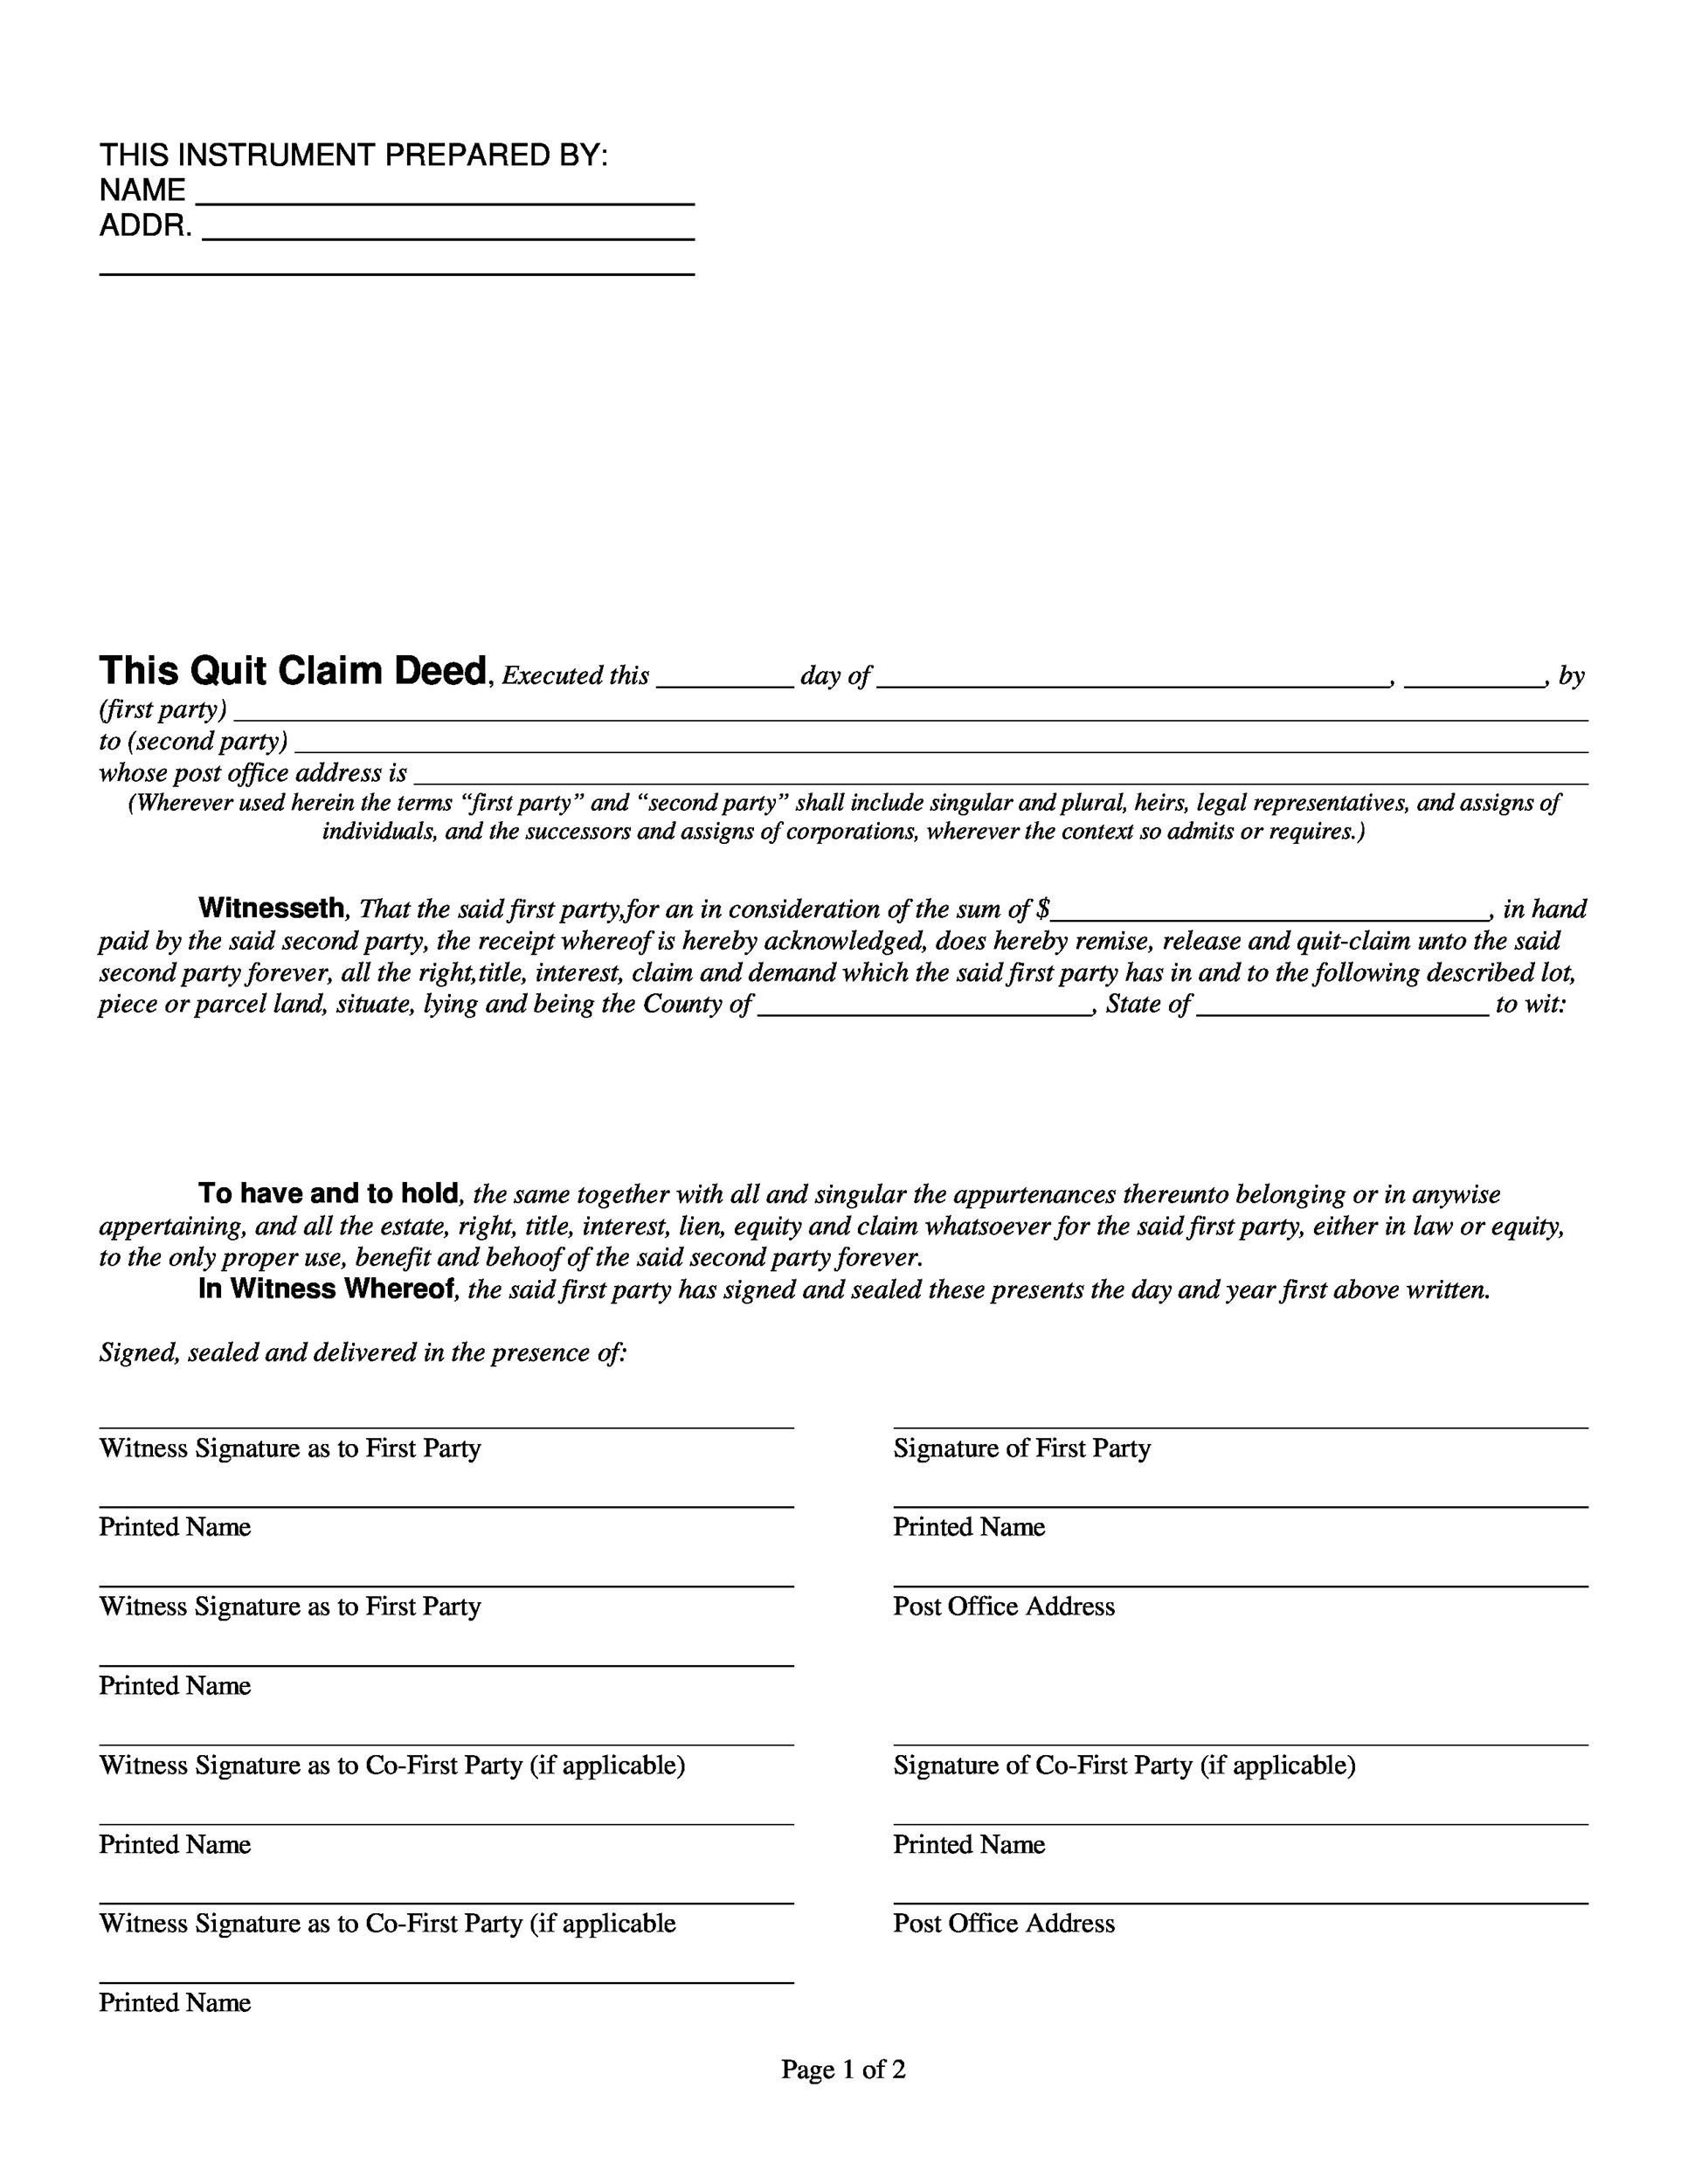 free-8-sample-quit-claim-deed-forms-in-pdf-ms-word